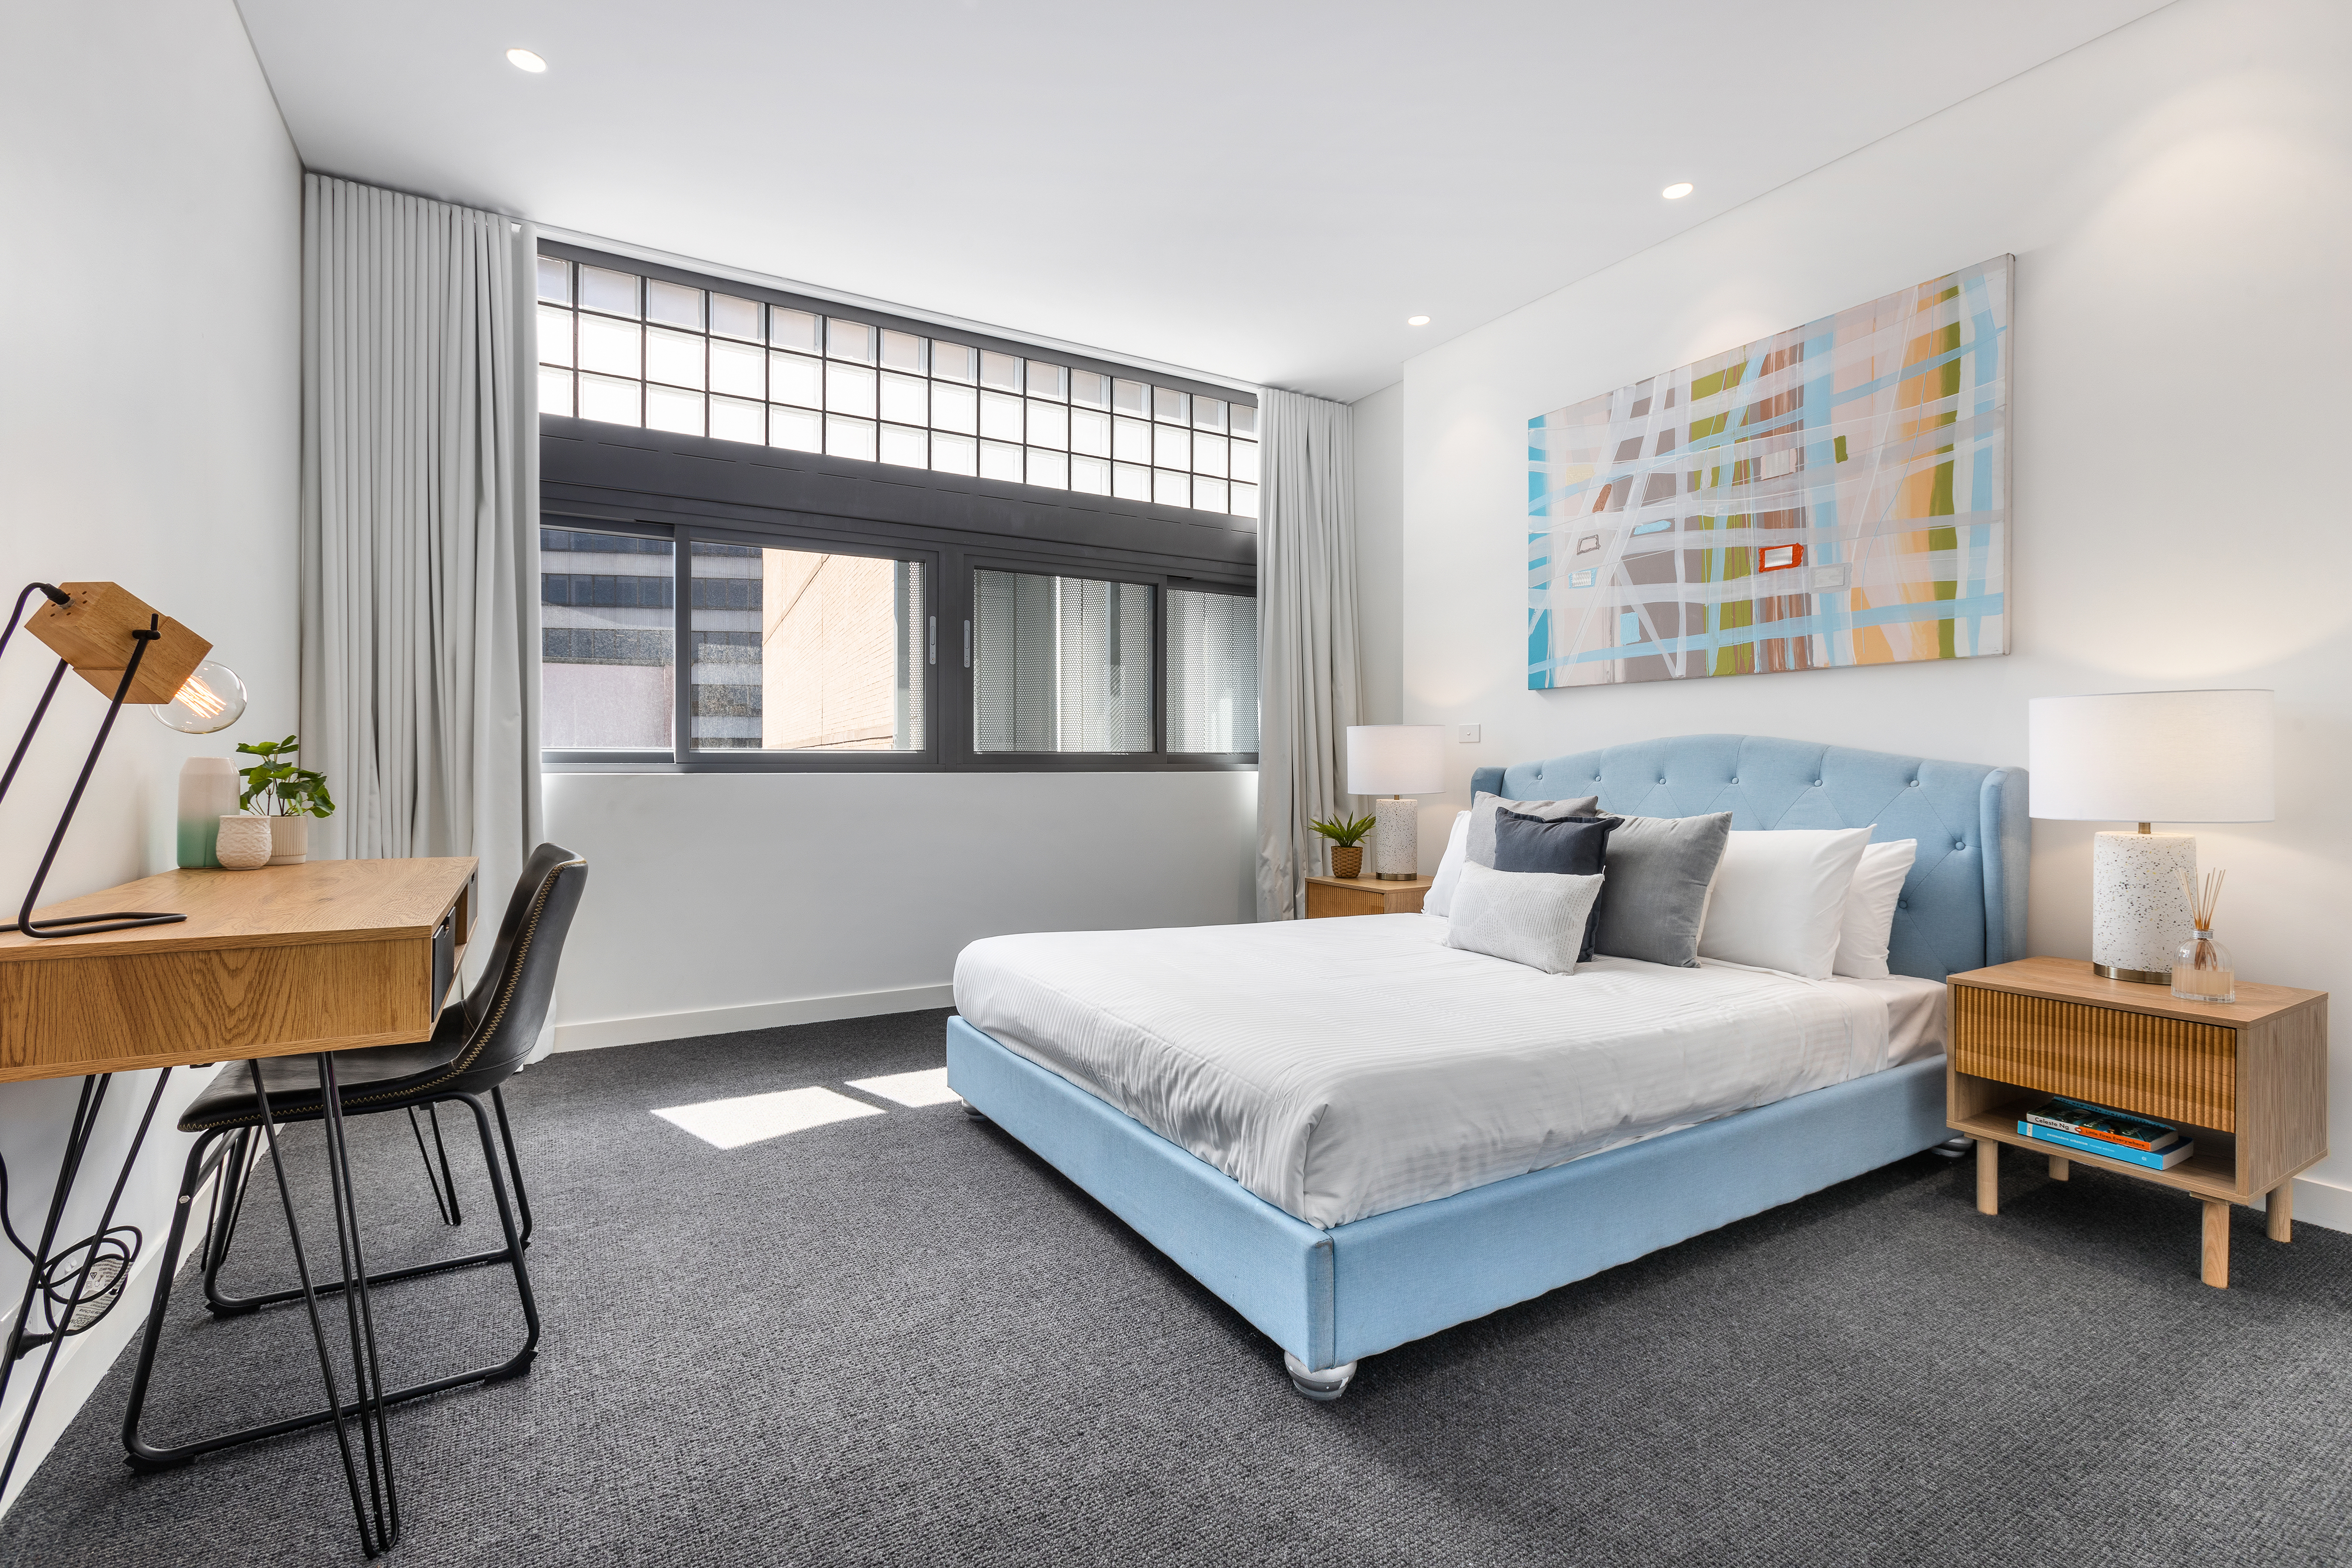 Bedroom 1 - Two Bedroom Apartment - Urban Rest - The Surry Apartments - Sydney